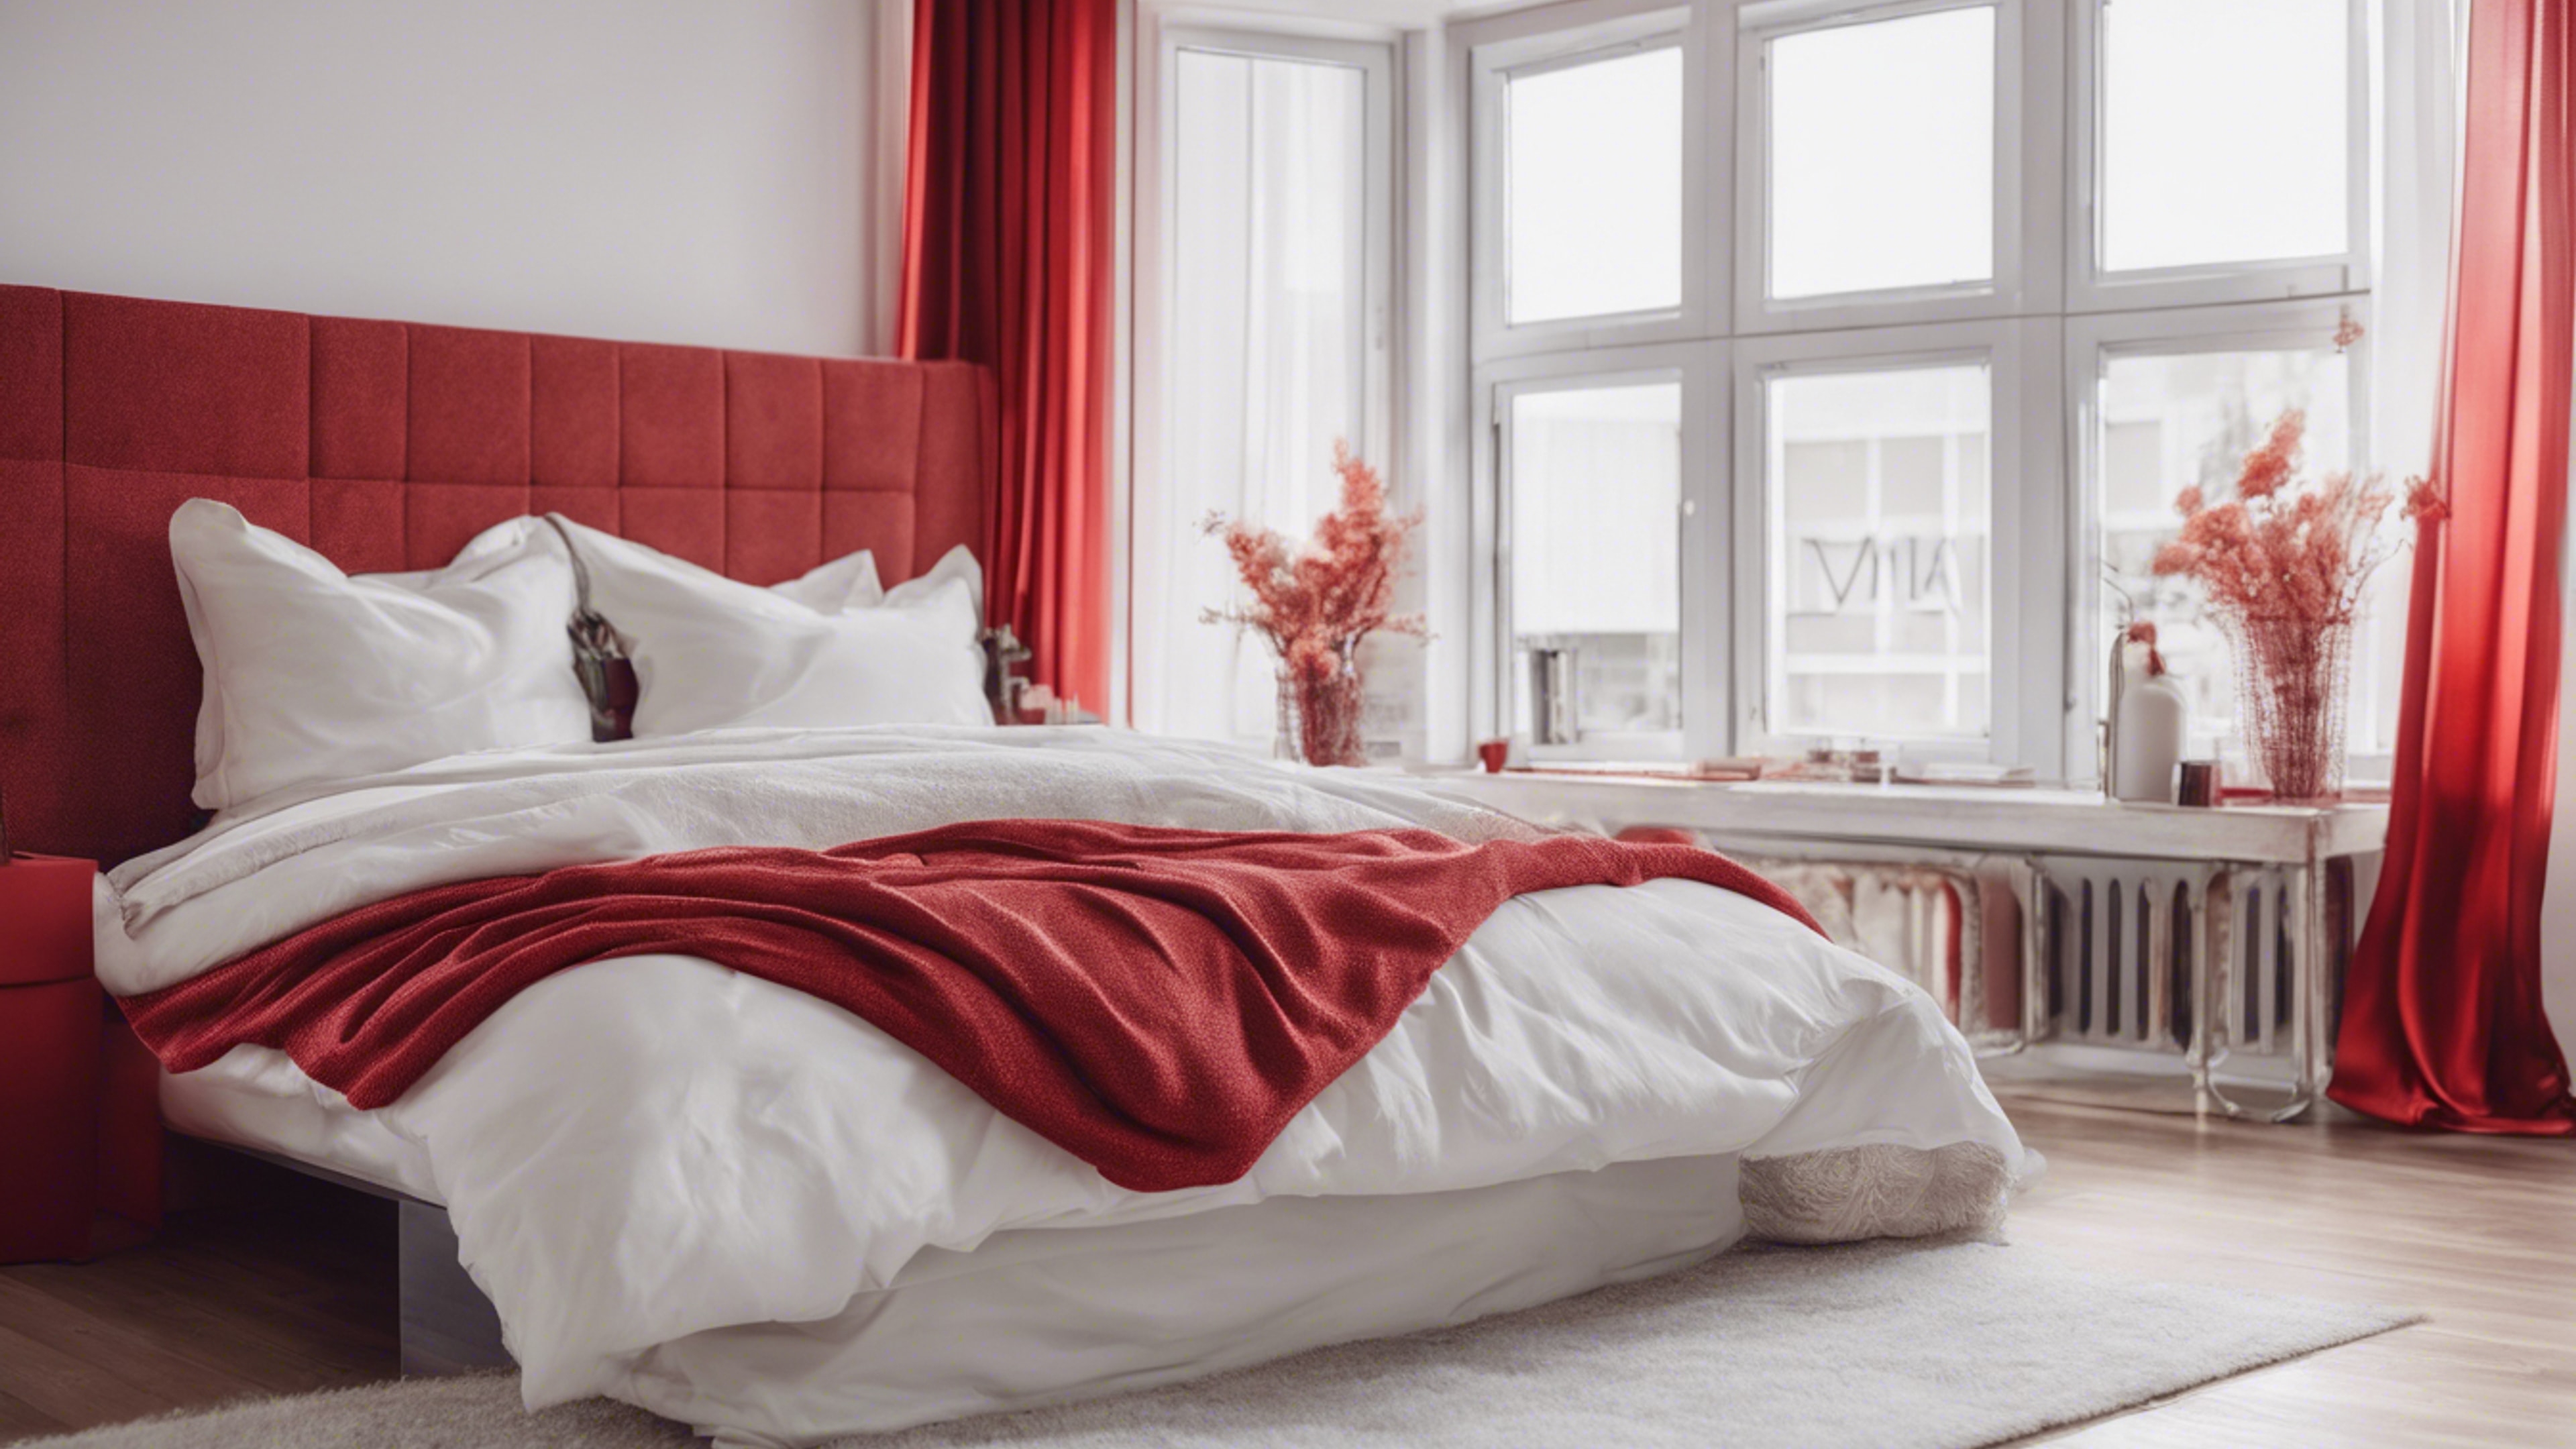 A contemporary bedroom decorated in minimalist red and white theme. 墙纸[ba3f34033fa9429b9d31]